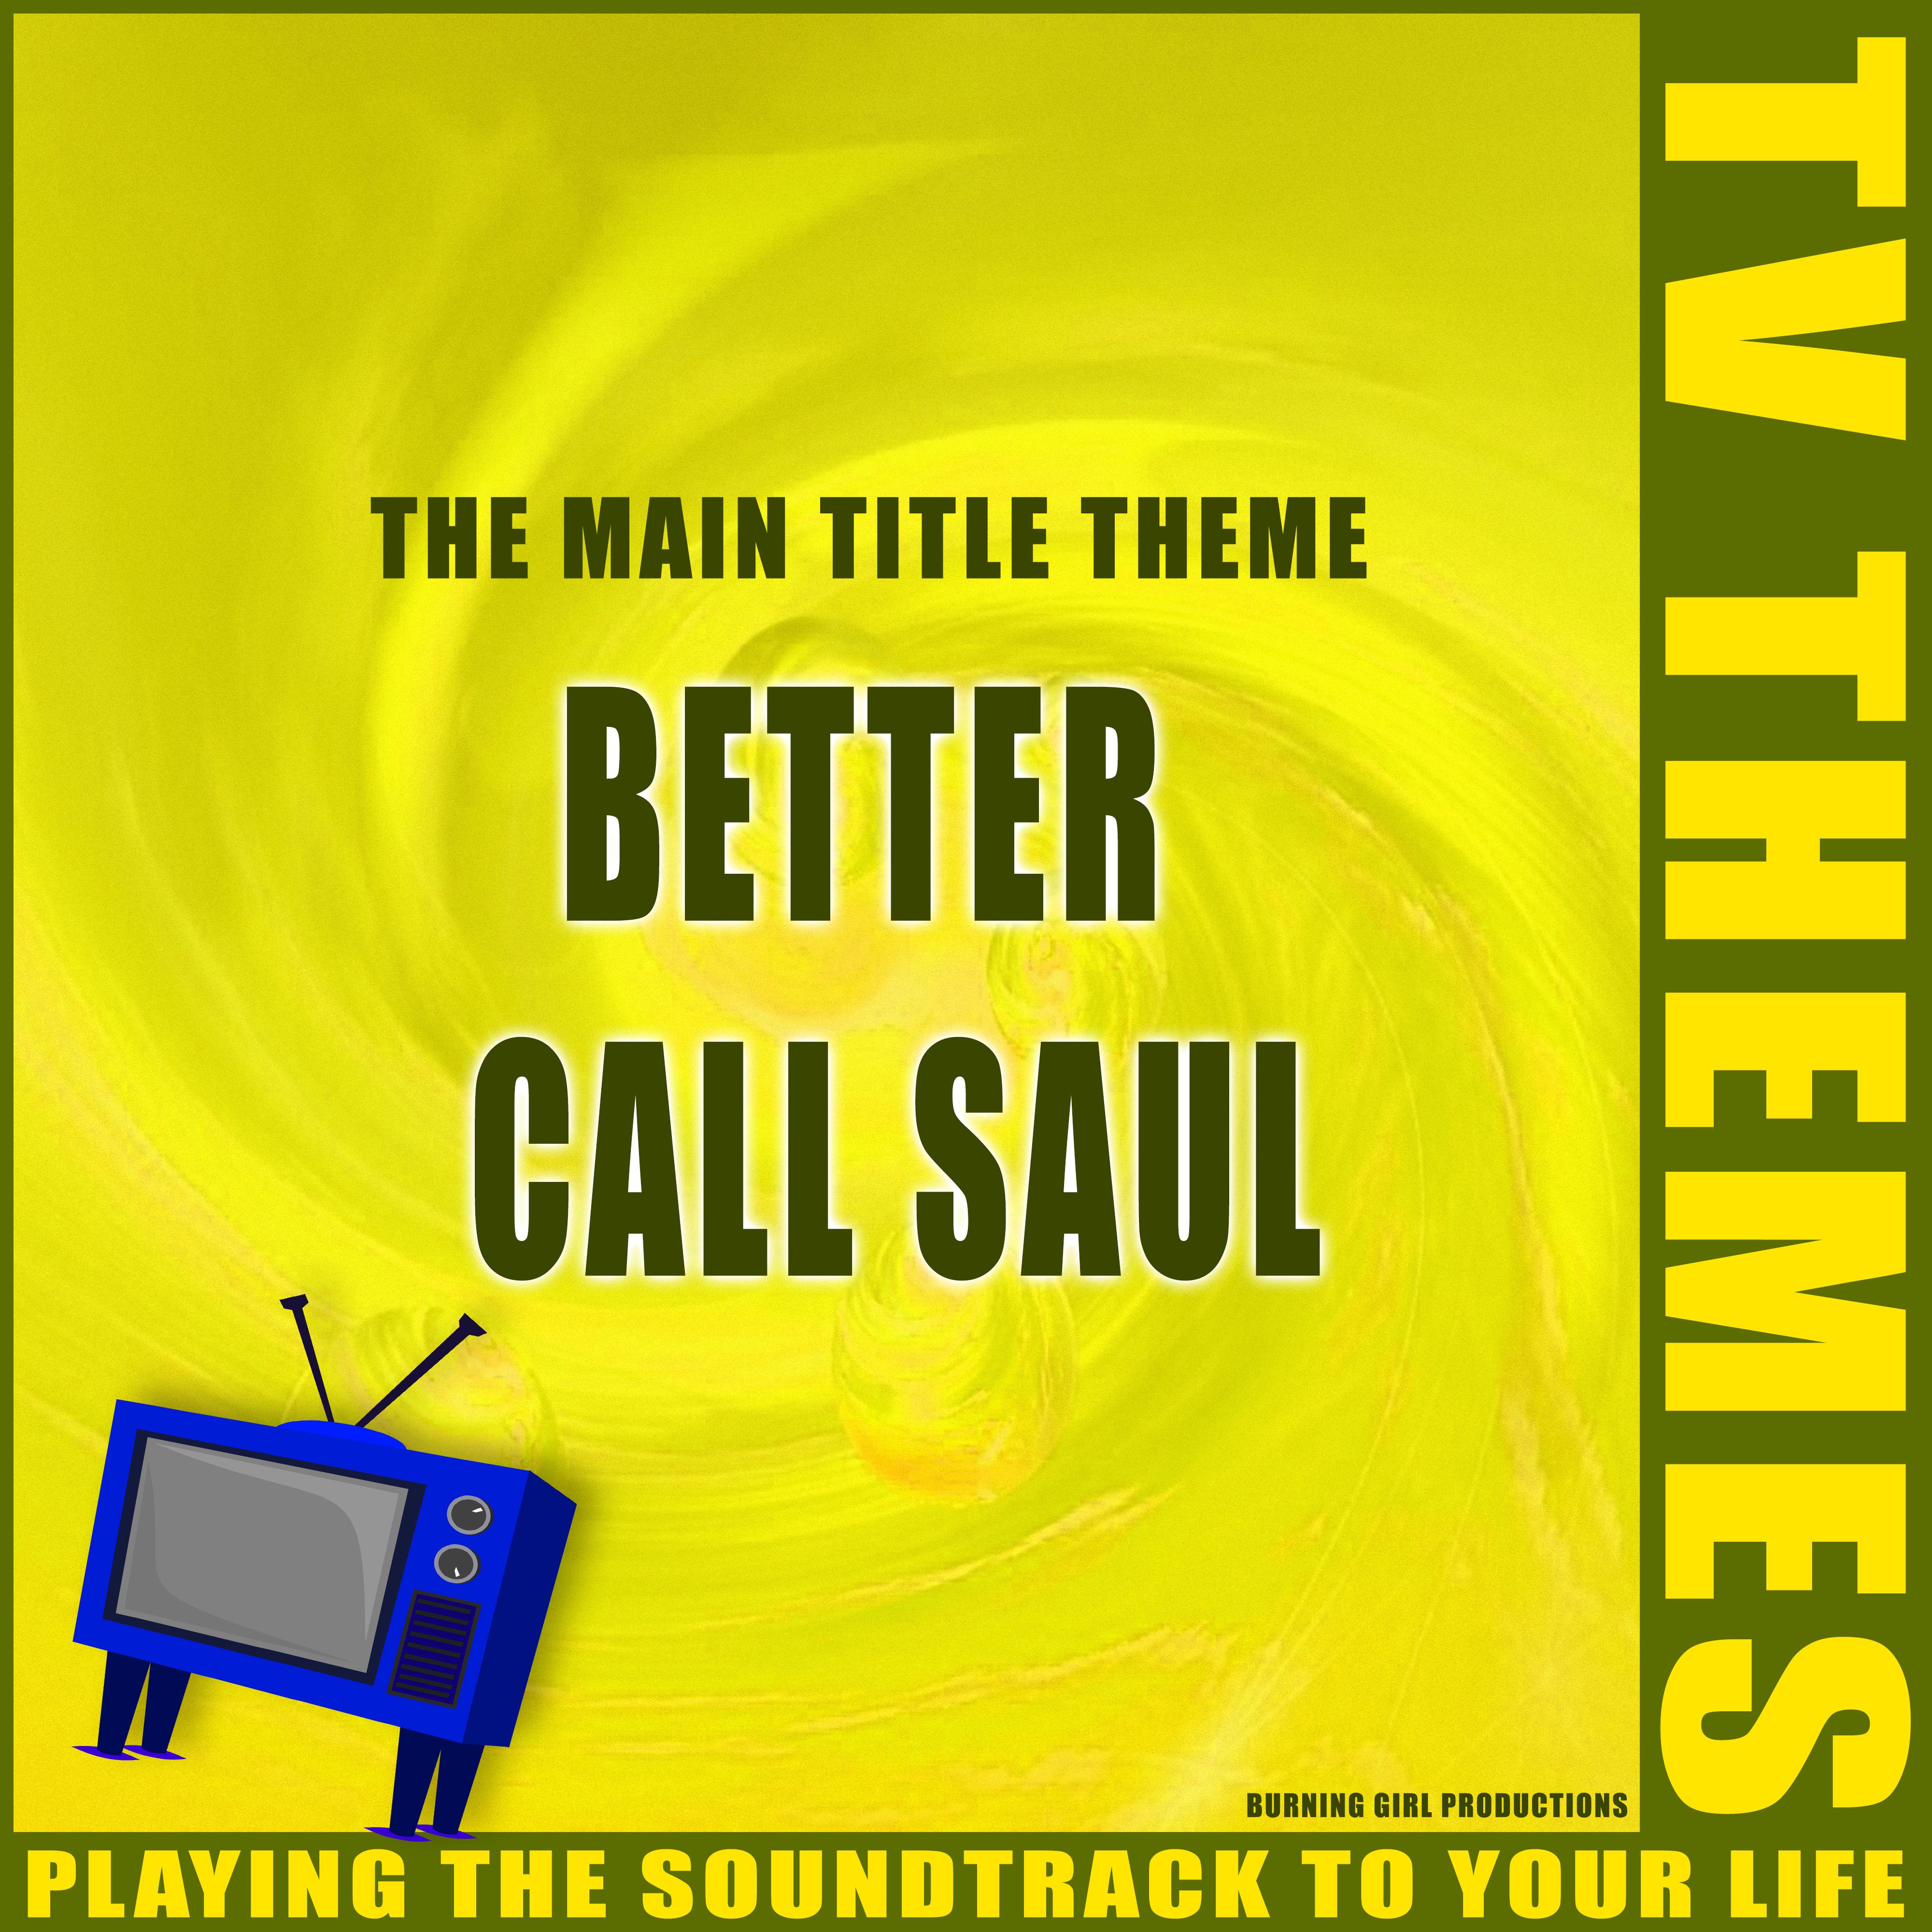 The Main Title Theme - Better Call Saul